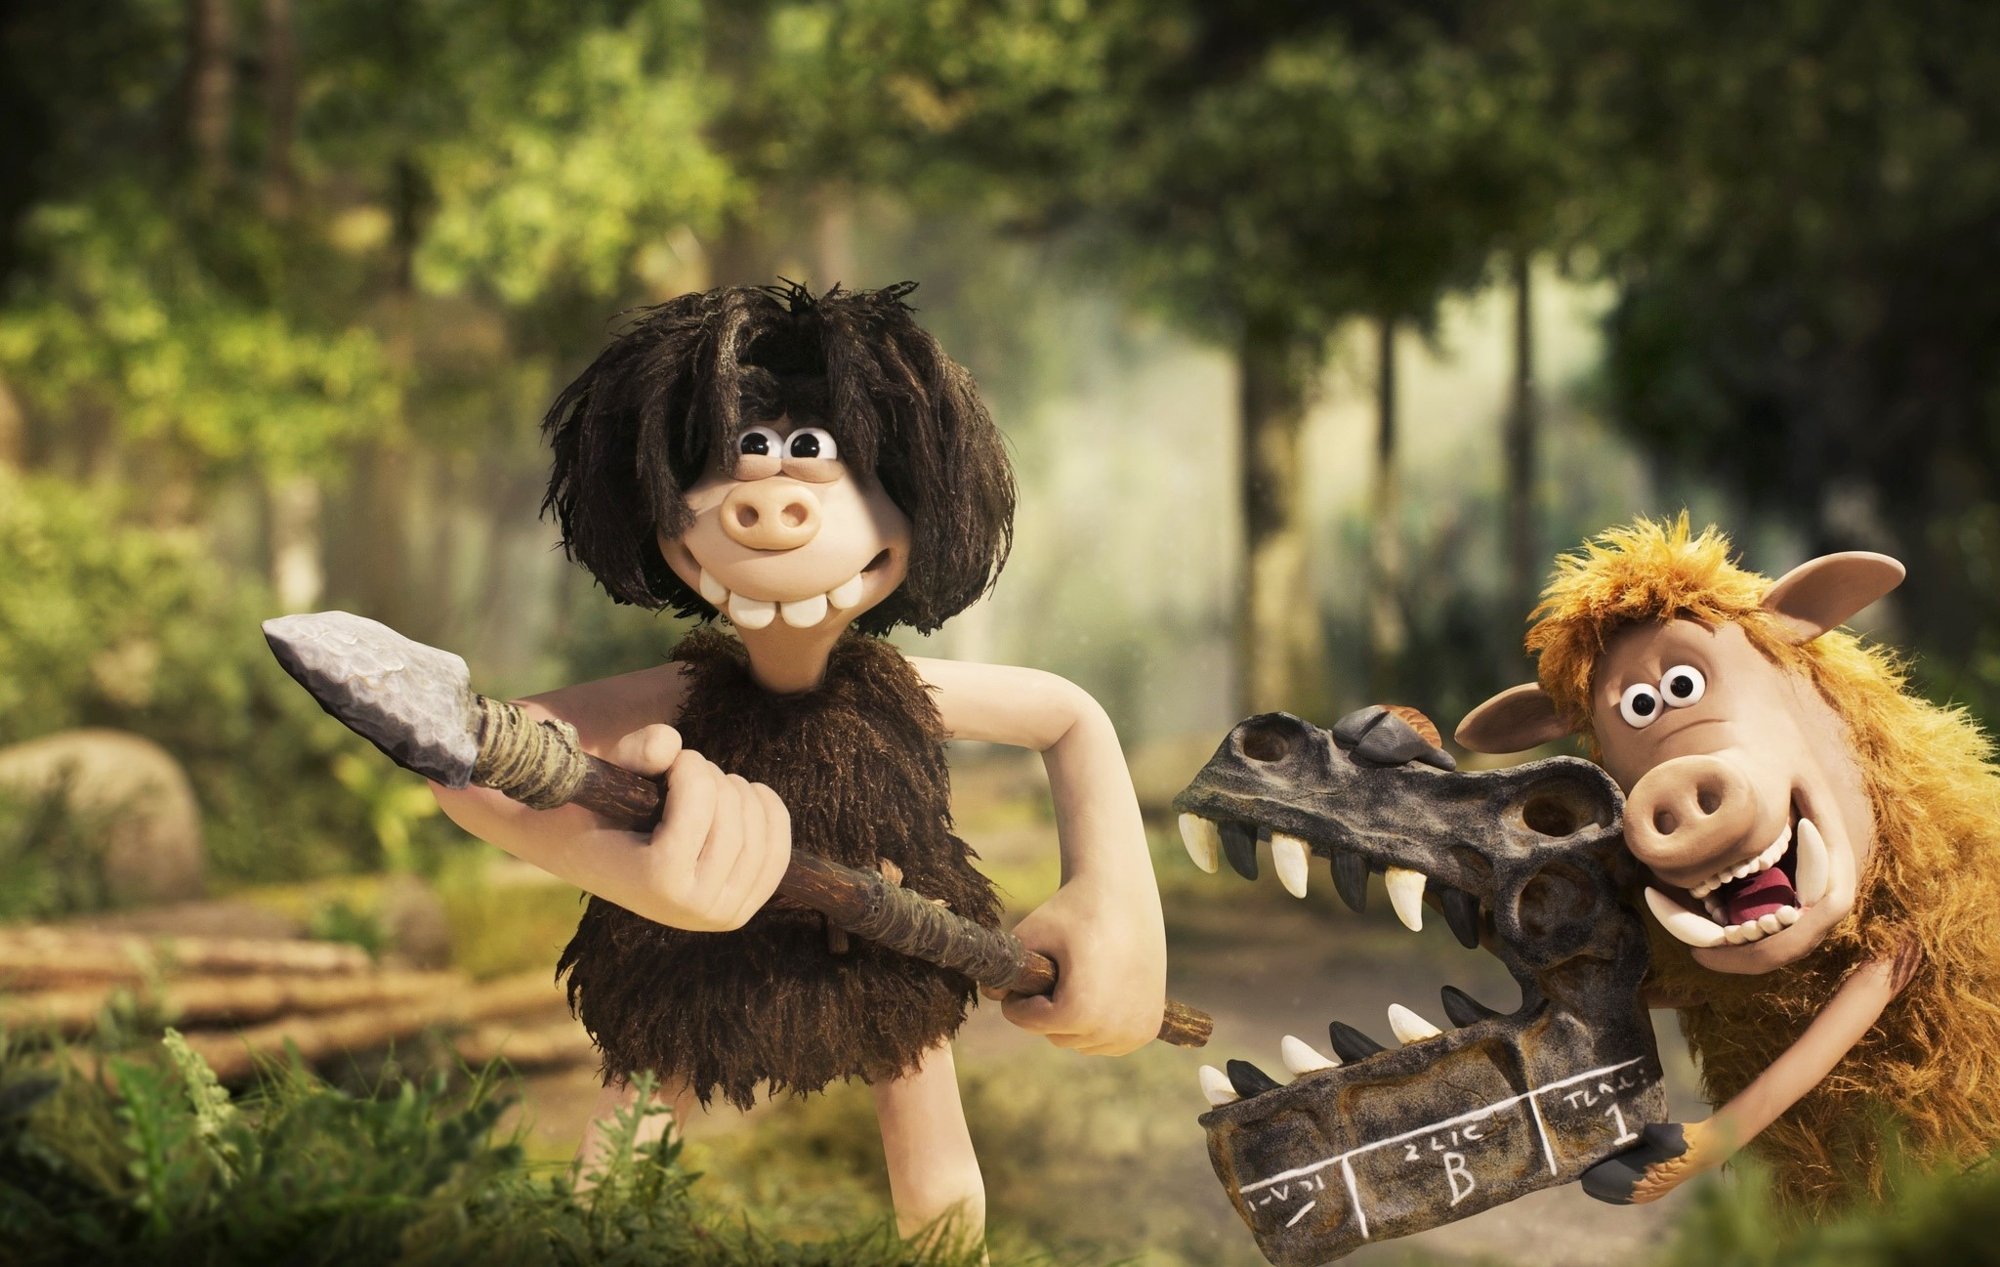 Dug from Summit Entertainment's Early Man (2018)